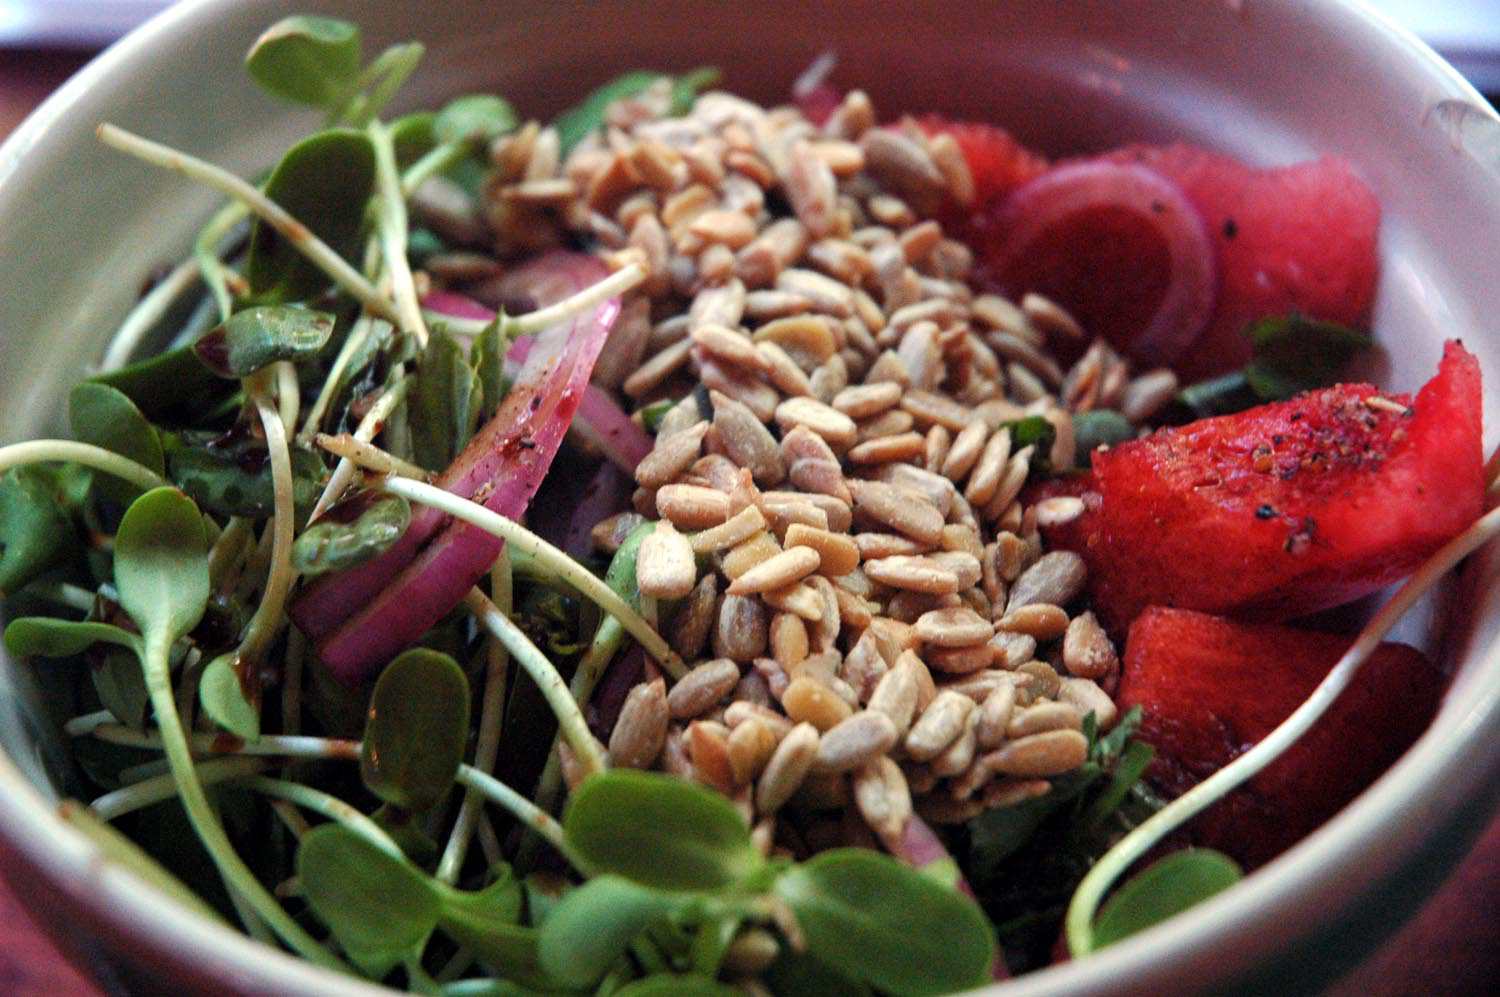 A bowl of seeds, sprouts, and watermelon